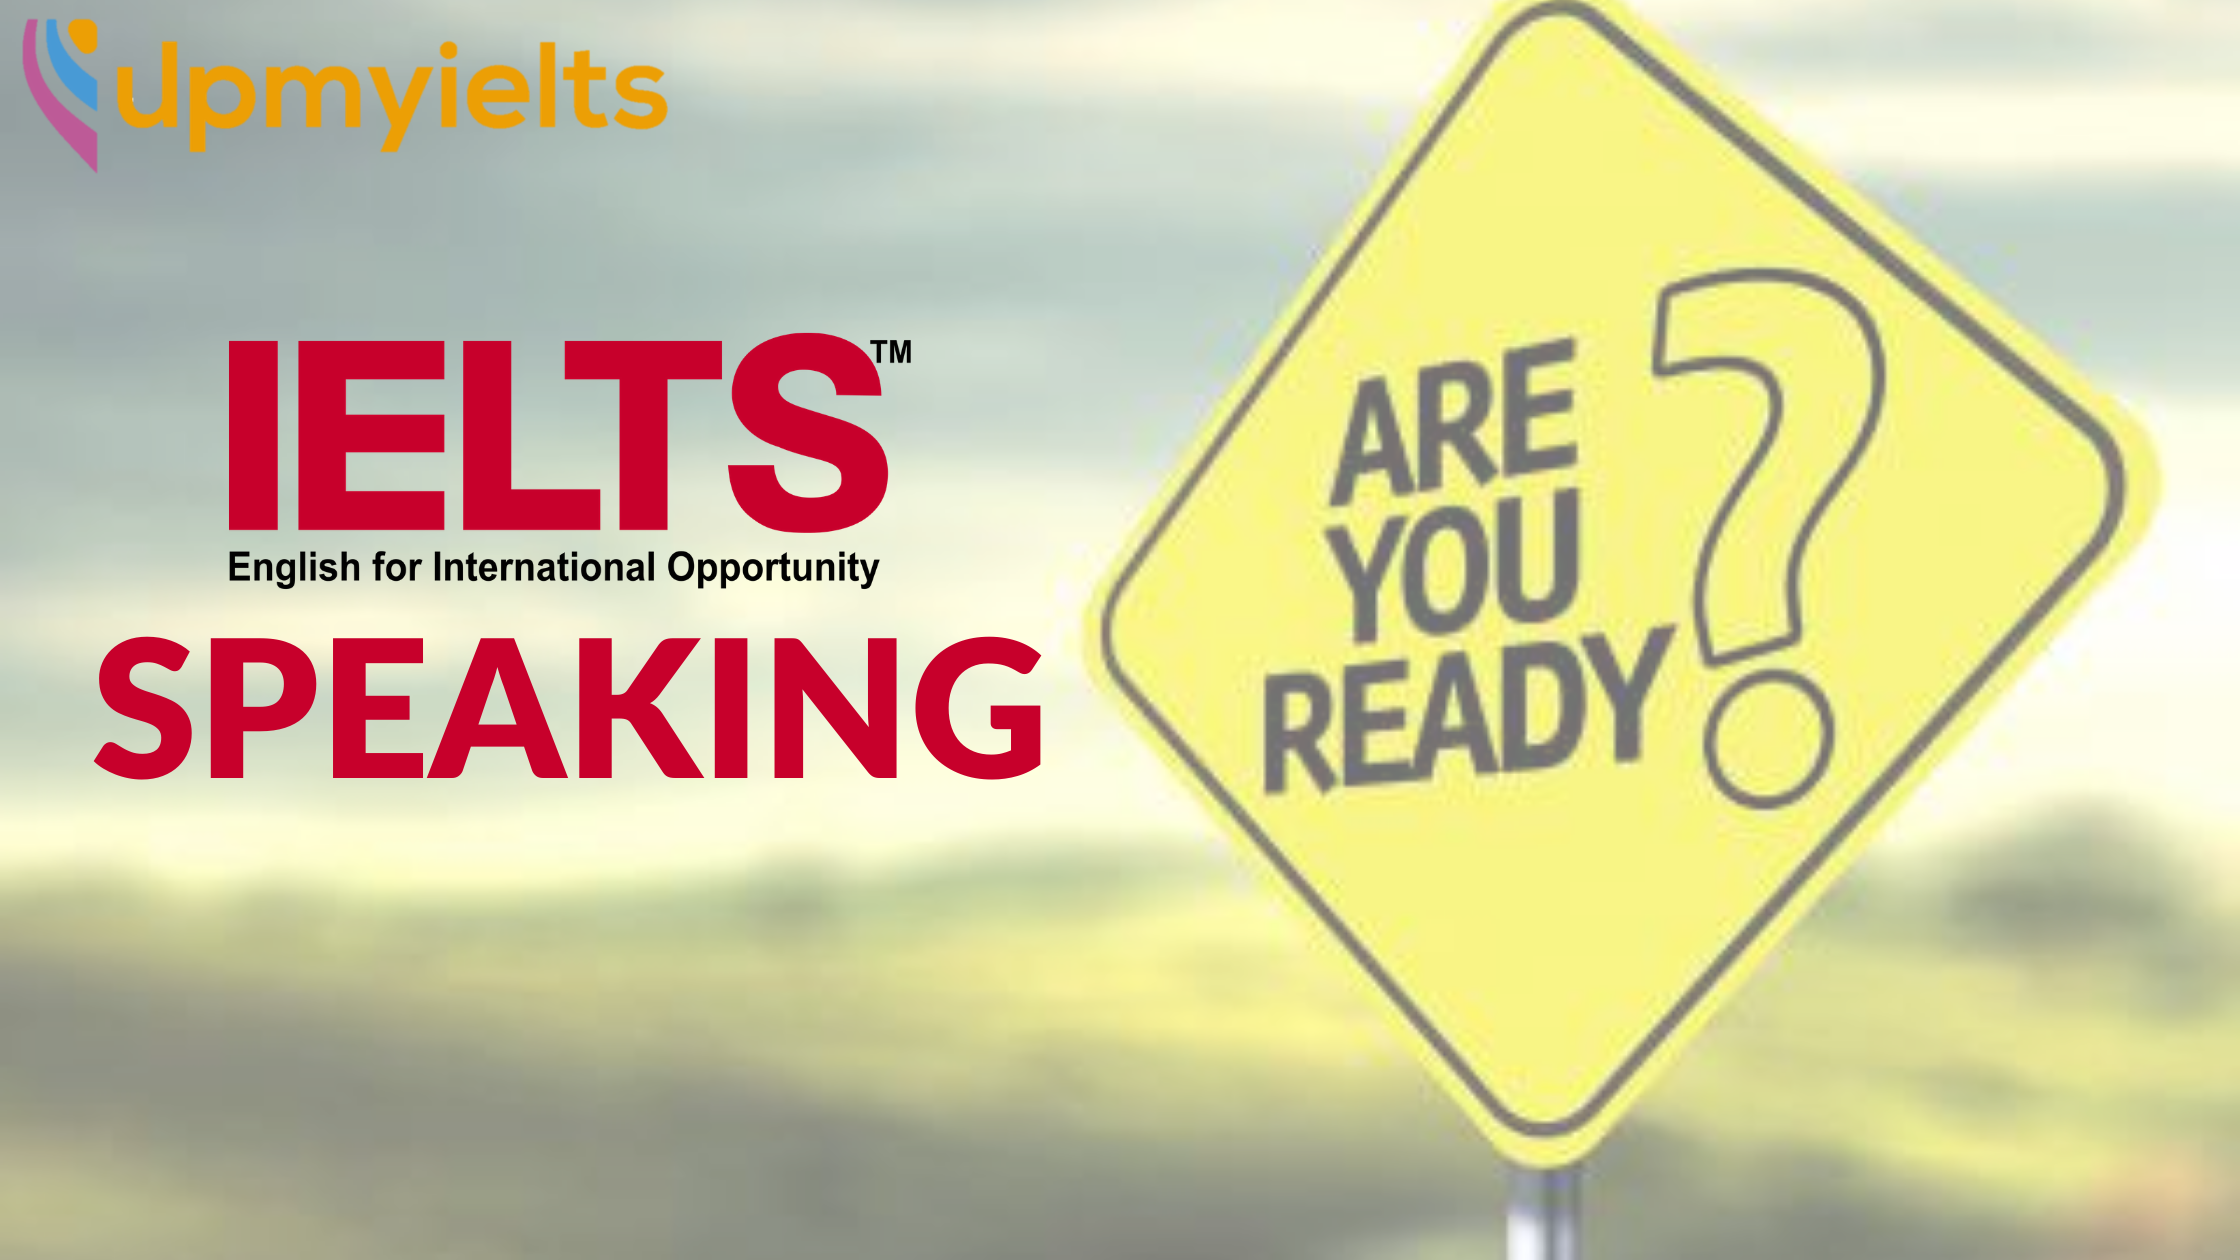 Are you ready for IELTS speaking?